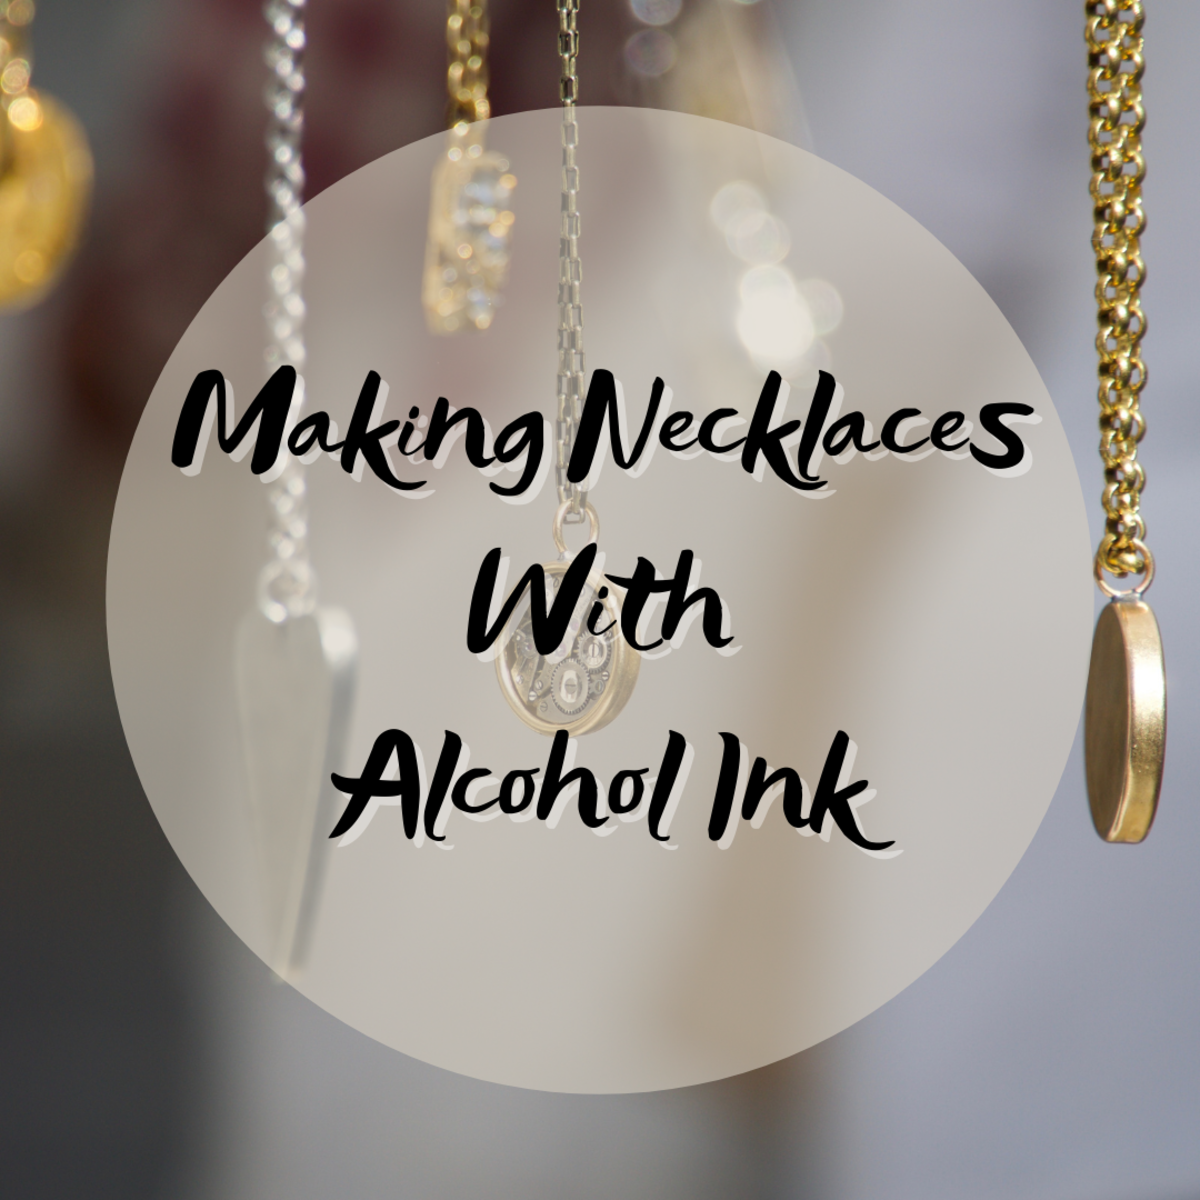 How to Make Necklaces Using Alcohol Ink on Metal